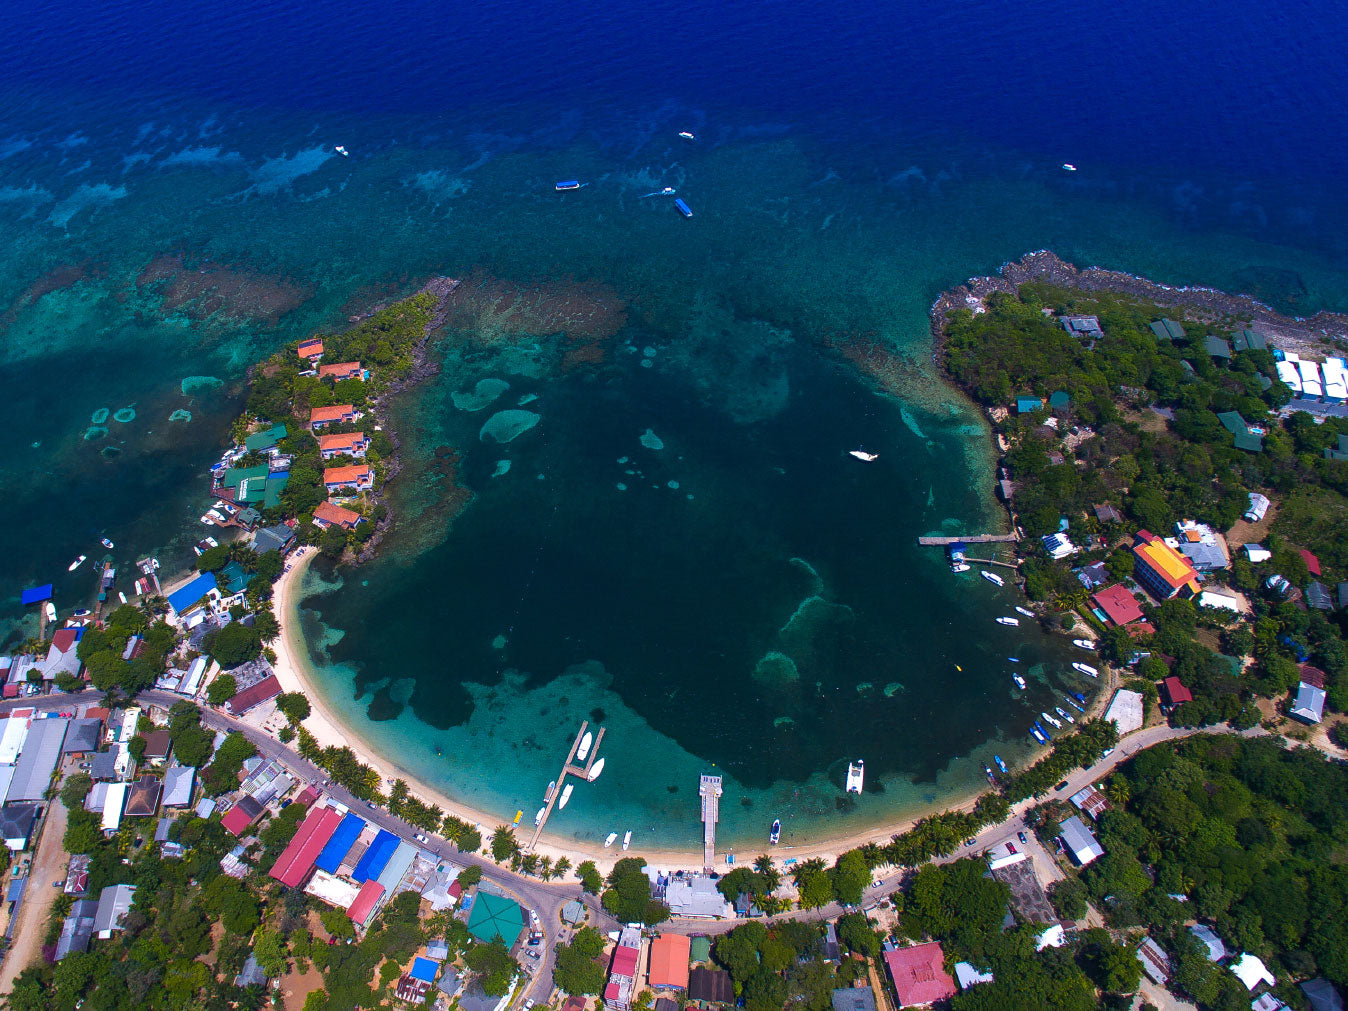 An Insider's Guide to Diving Roatan, Bay Islands